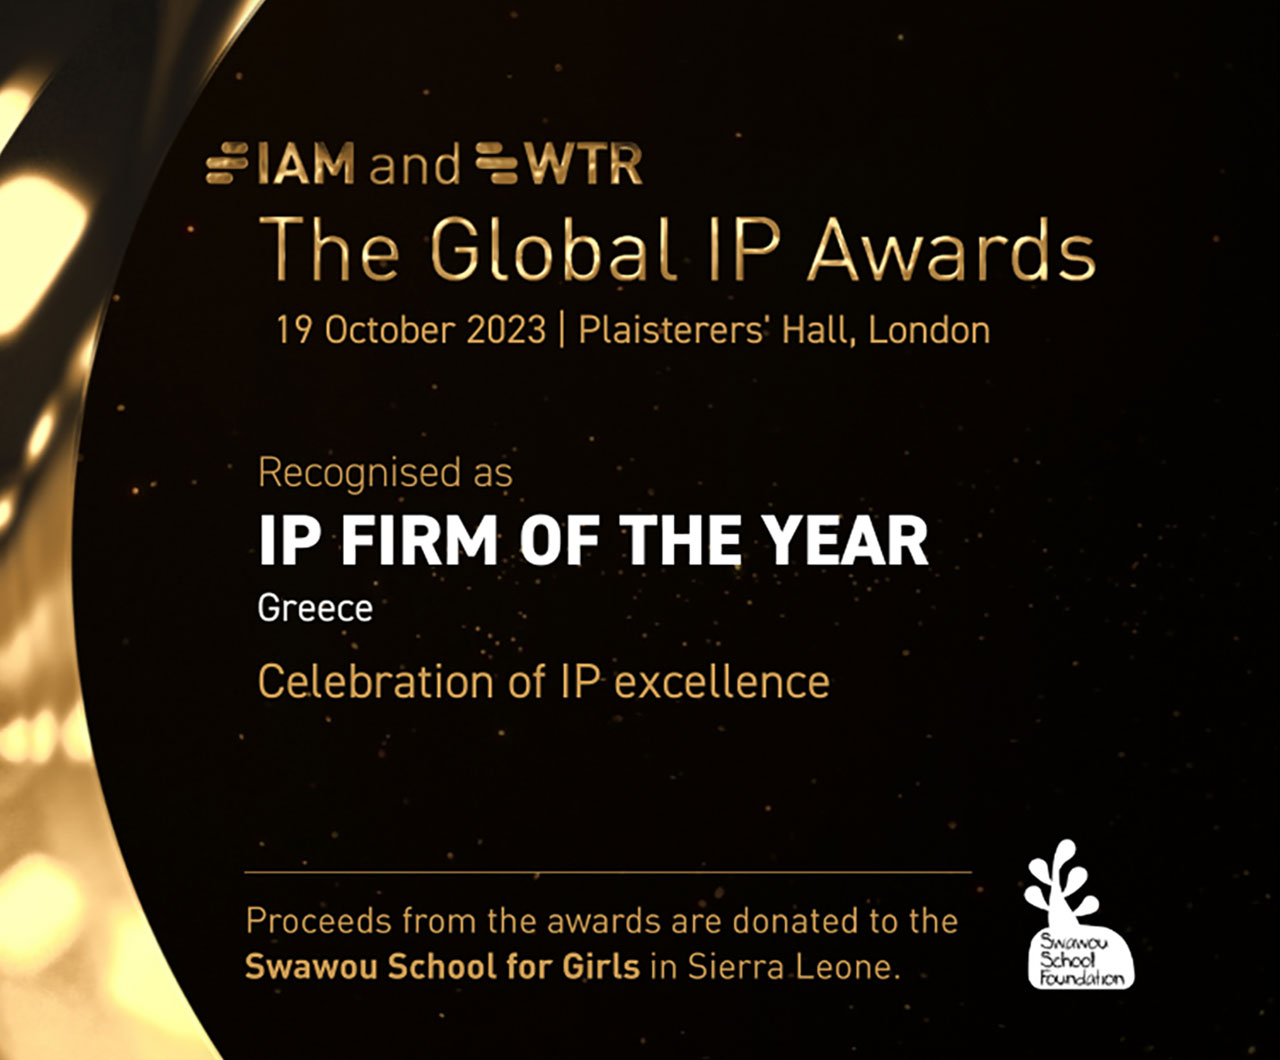 Our firm is named IP Firm of the Year in Greece